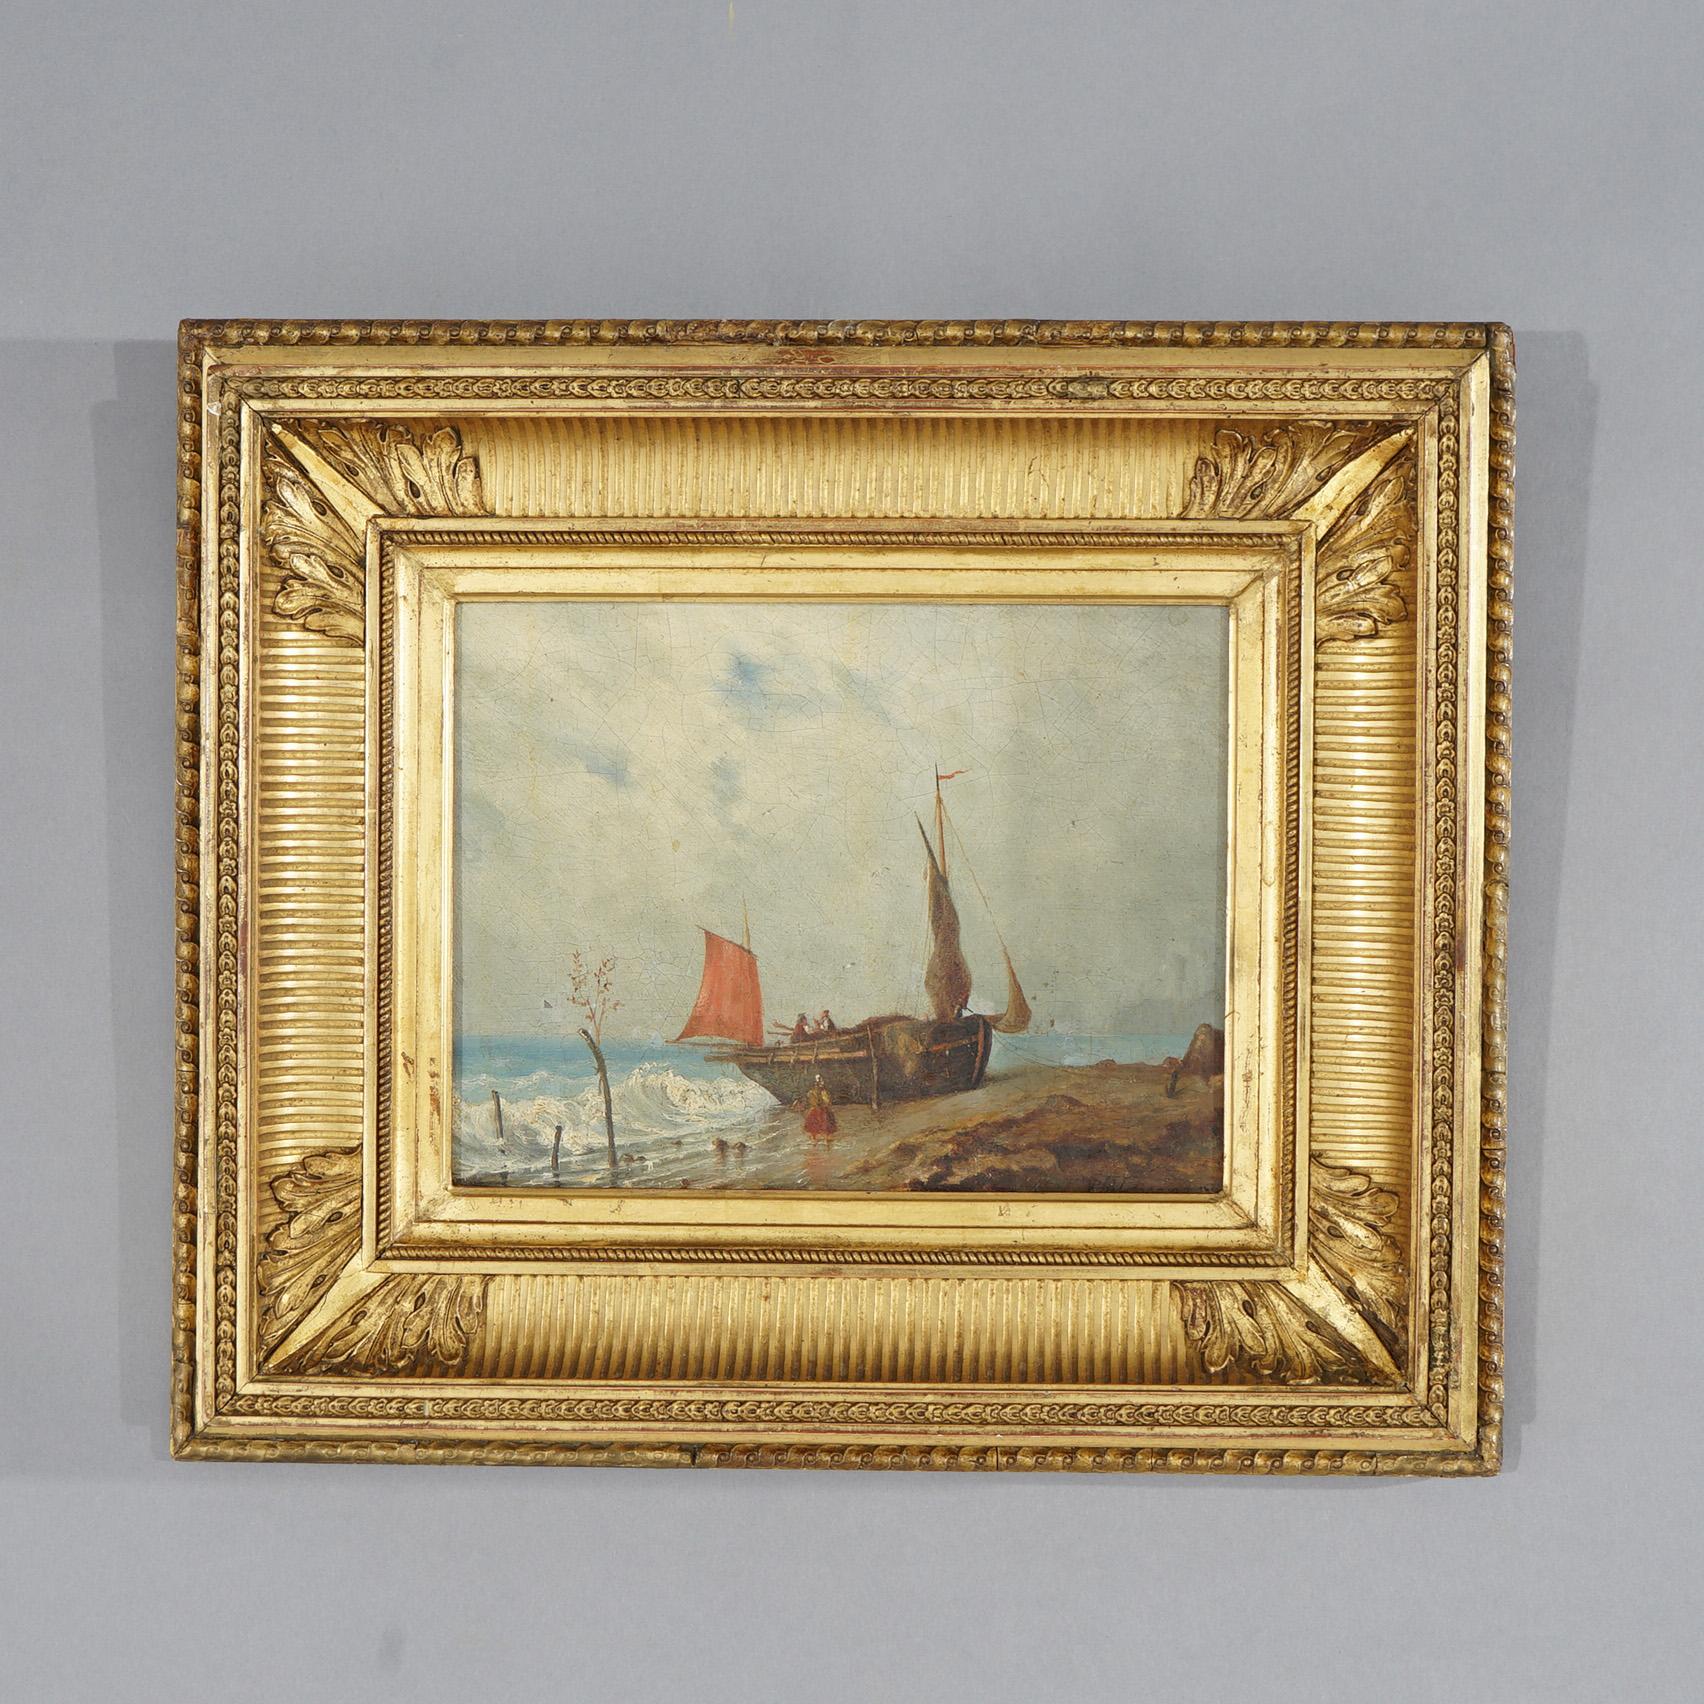 An antique seascape painting by Victor Philippe Philipsen offers oil on board coastal scene with beached ship and figures, artist signed lower right, weared in cove molded giltwood frame, 19th century.

Measures - 13.75